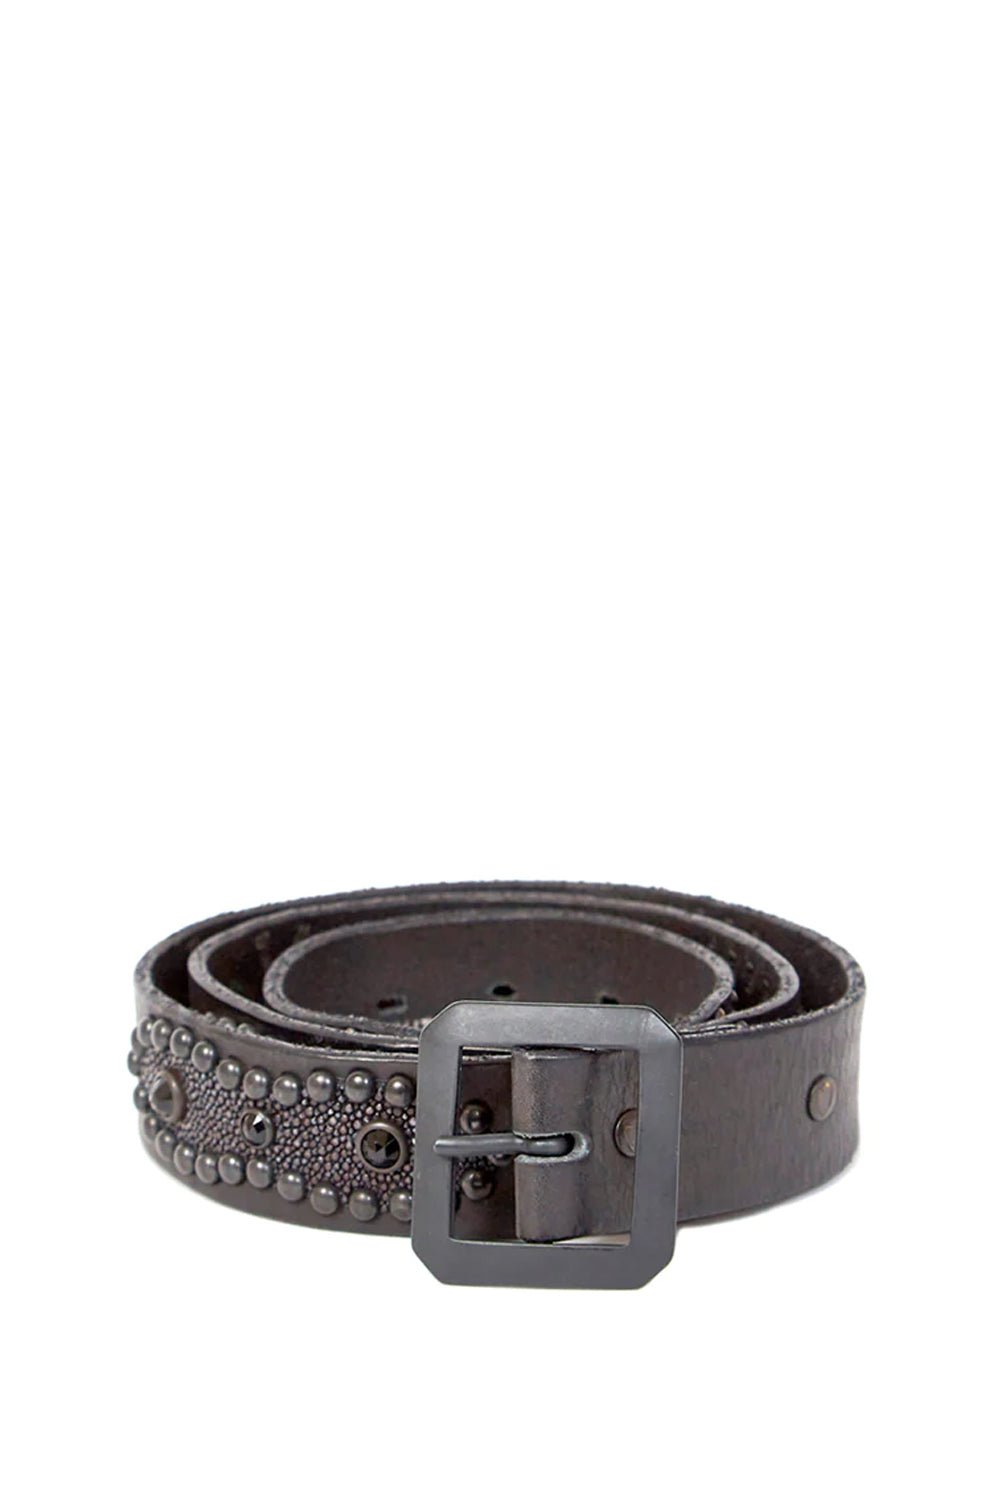 MARLENA SLIM BELT Black leather belt with Metal insert. Squared opaque black buckle. Height: 3,5 cm. Made in Italy. HTC LOS ANGELES